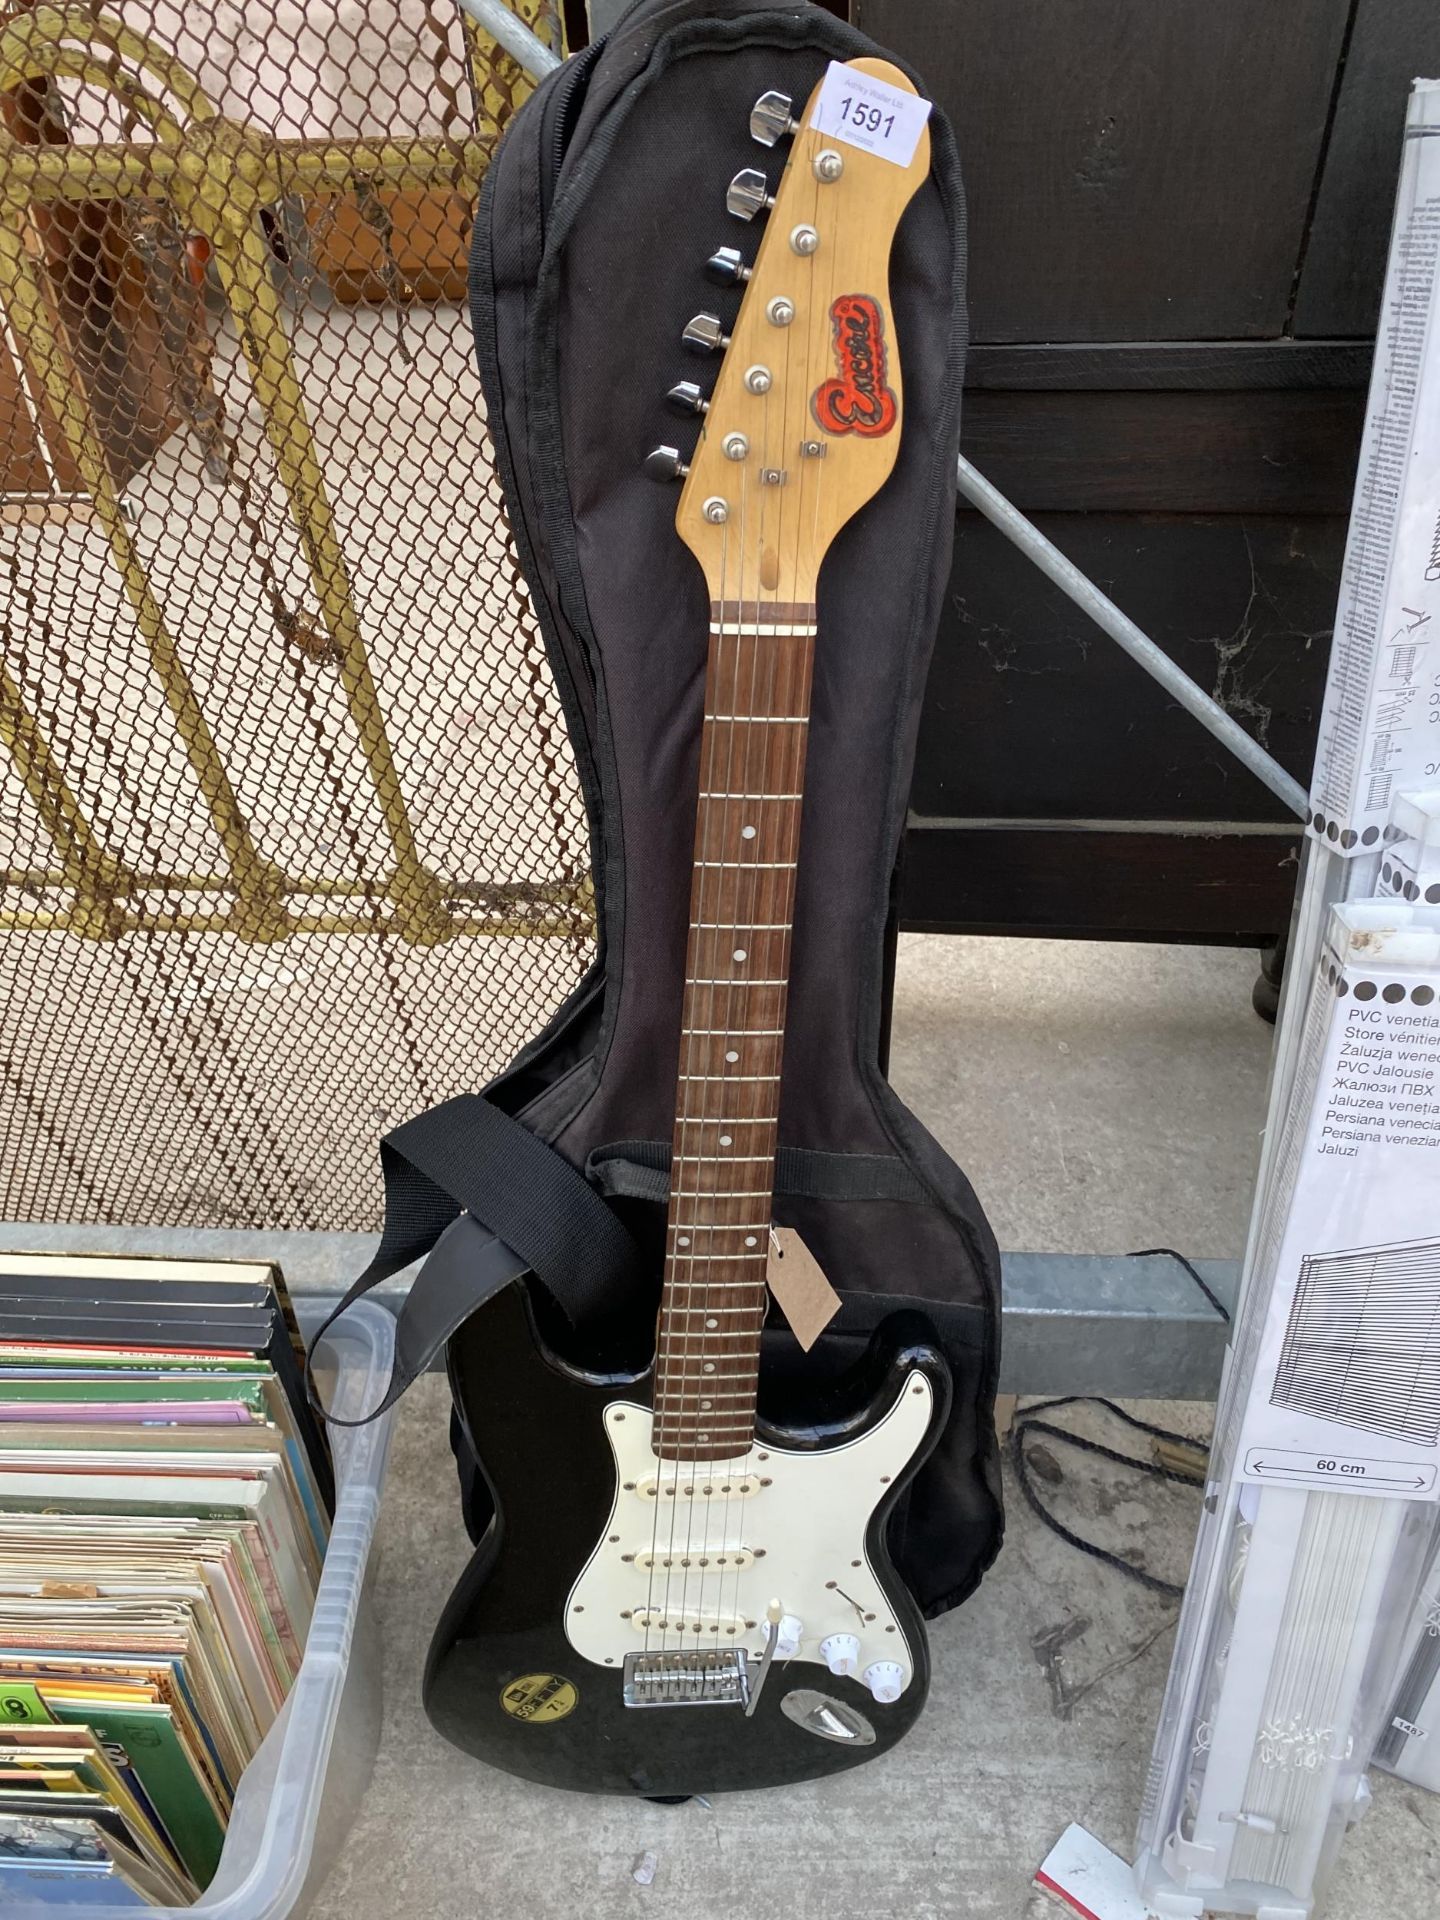 AN ENCORE ELECTRIC GUITAR AND CARRY CASE